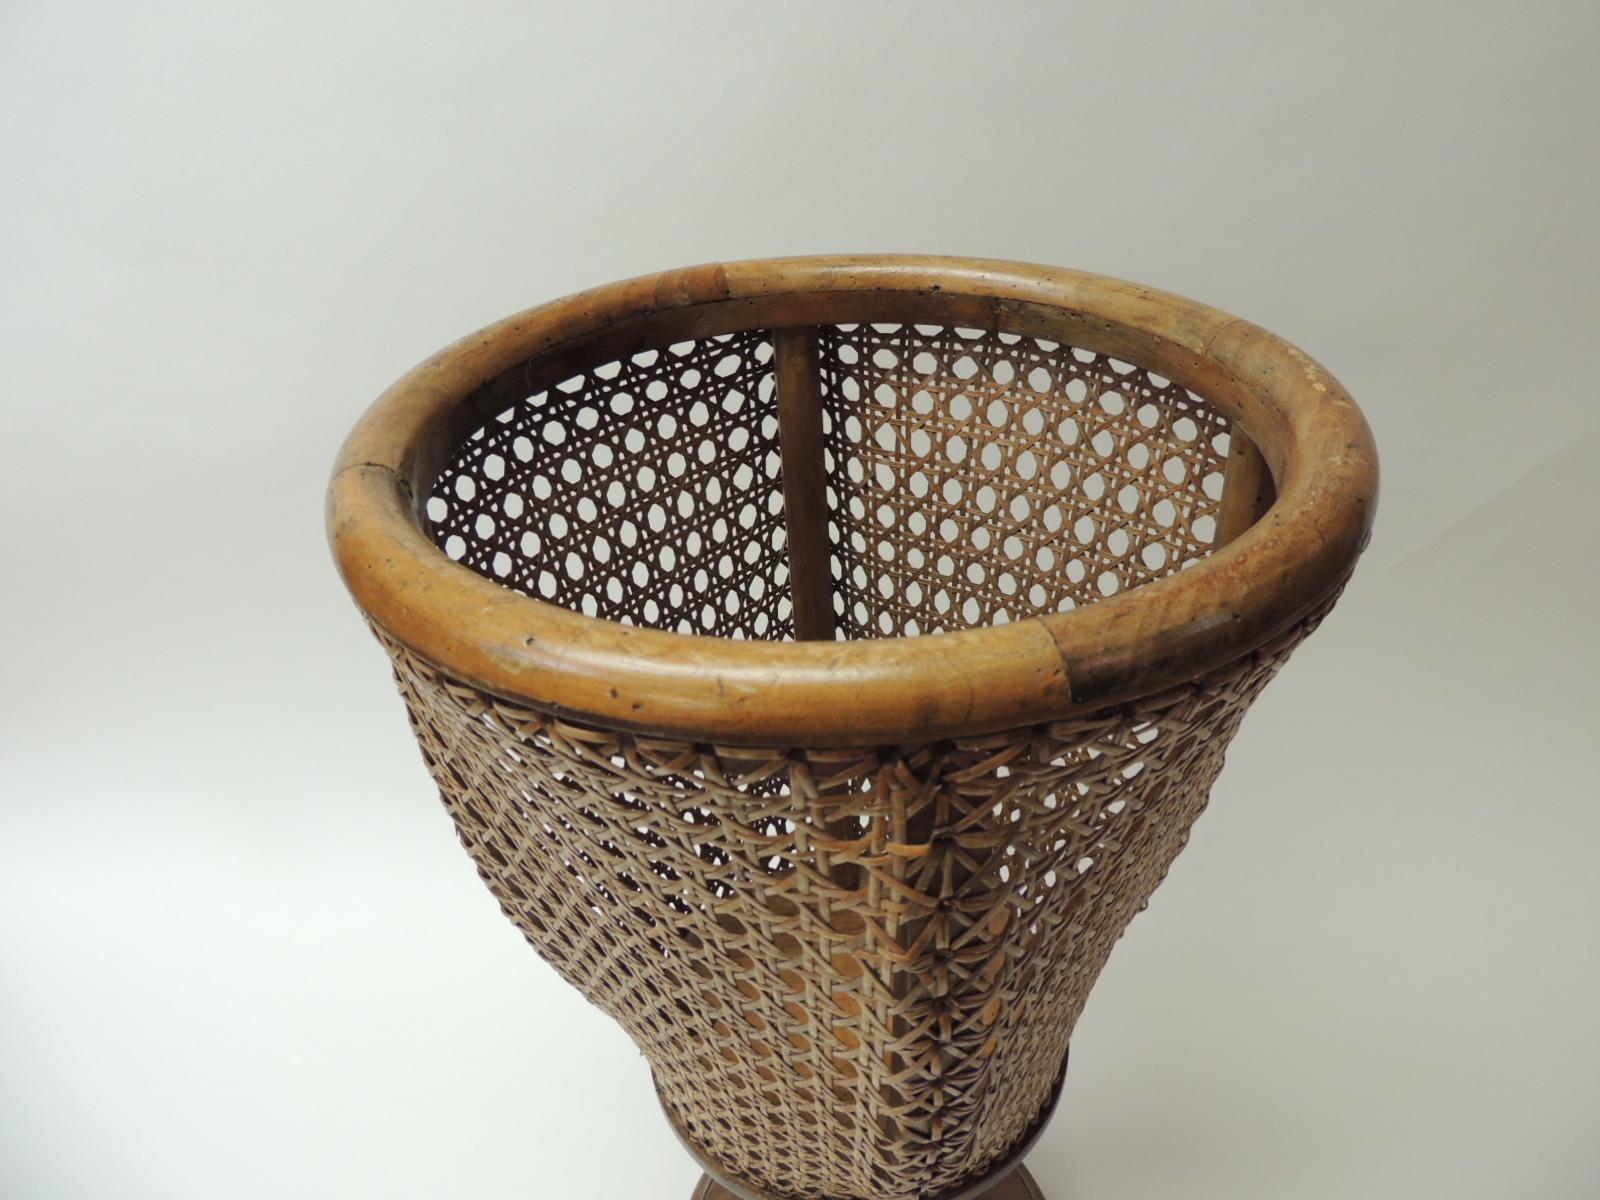 Vintage tall bent wood planter
Tall round footed vintage planter wood base and wicker caning all around.
Stamped, made in Italy 1983
Size: 12” D x 19.5” H
Base is 8” D.
 